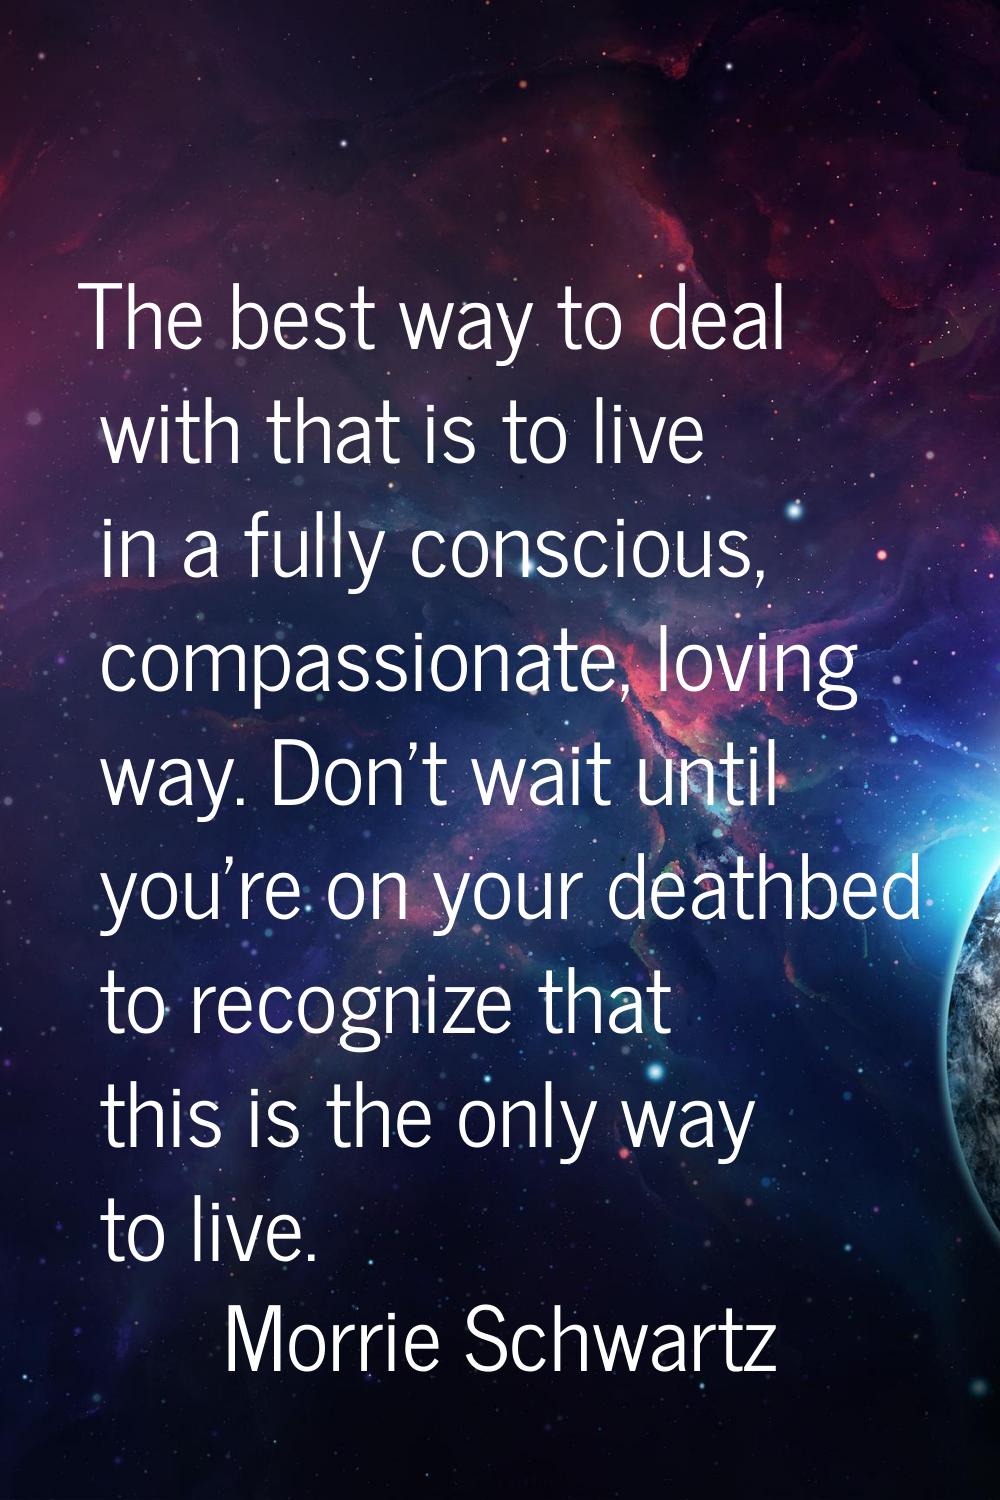 The best way to deal with that is to live in a fully conscious, compassionate, loving way. Don't wa